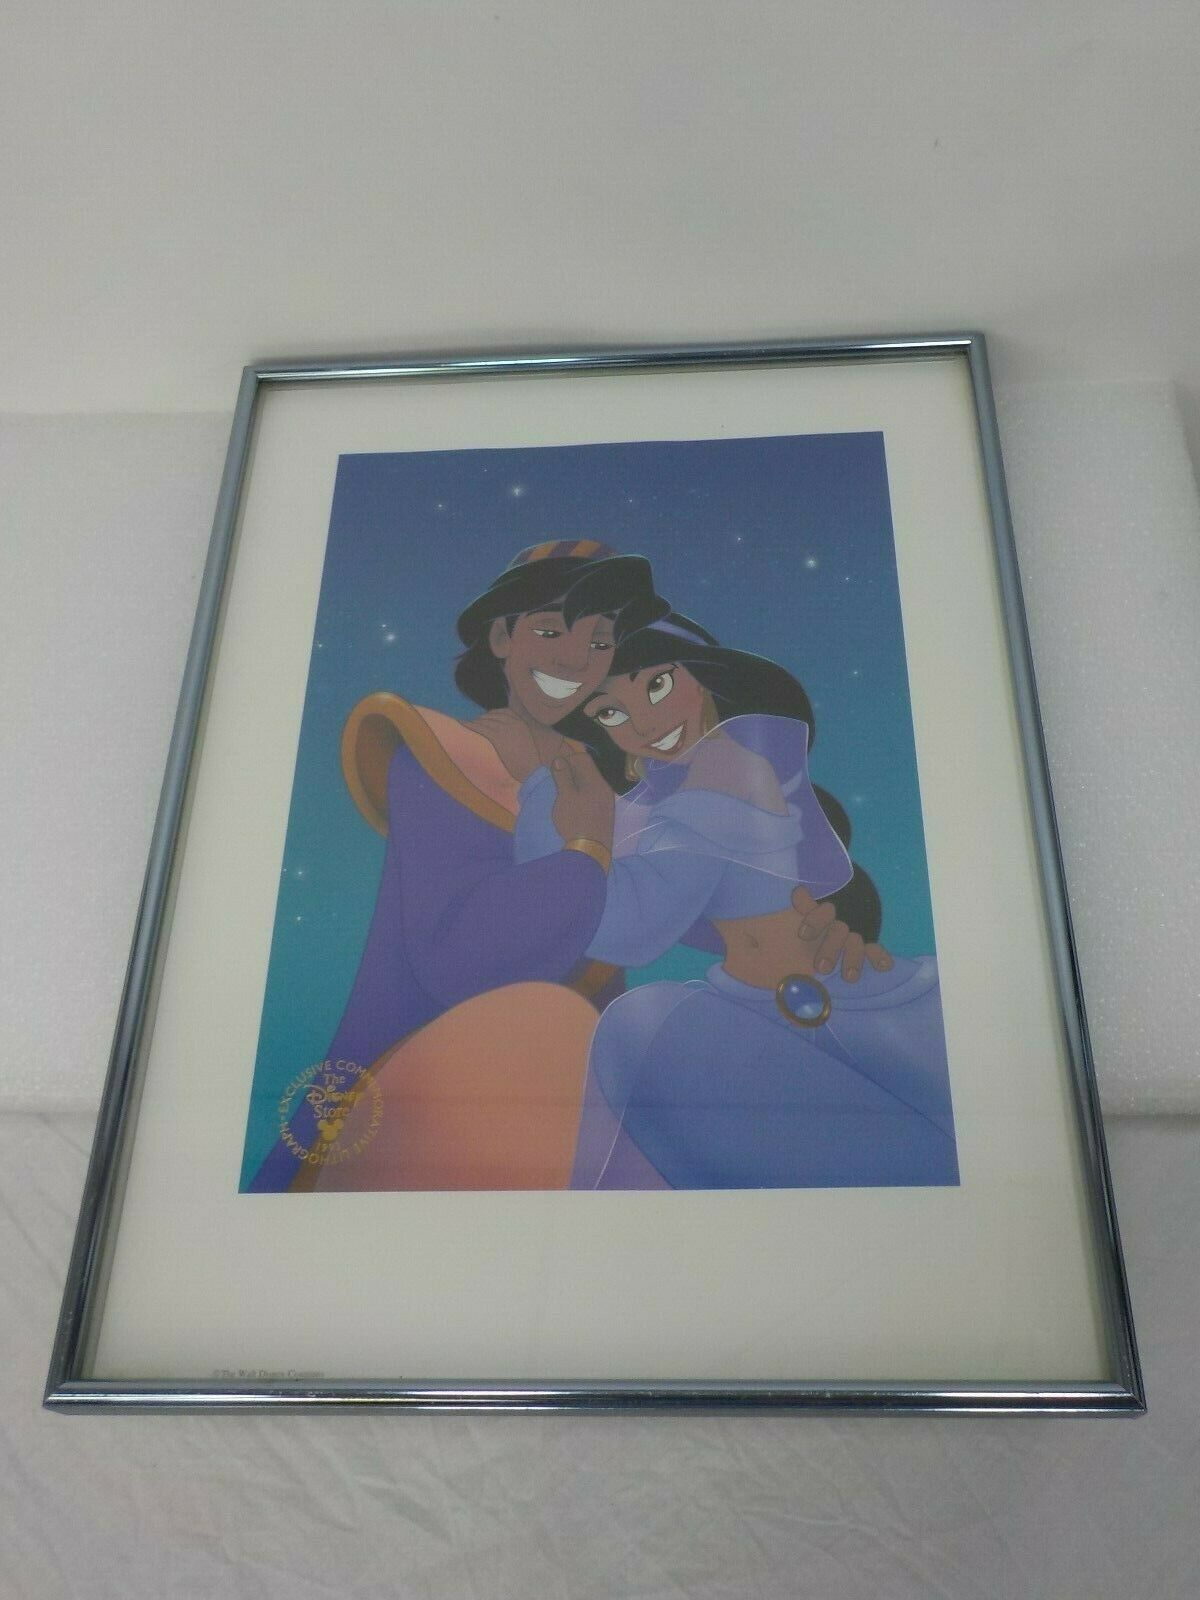 Aladdin & Jasmine 1993 Vintage Lithograph Picture Disney Store Exclusive Framed - $21.25